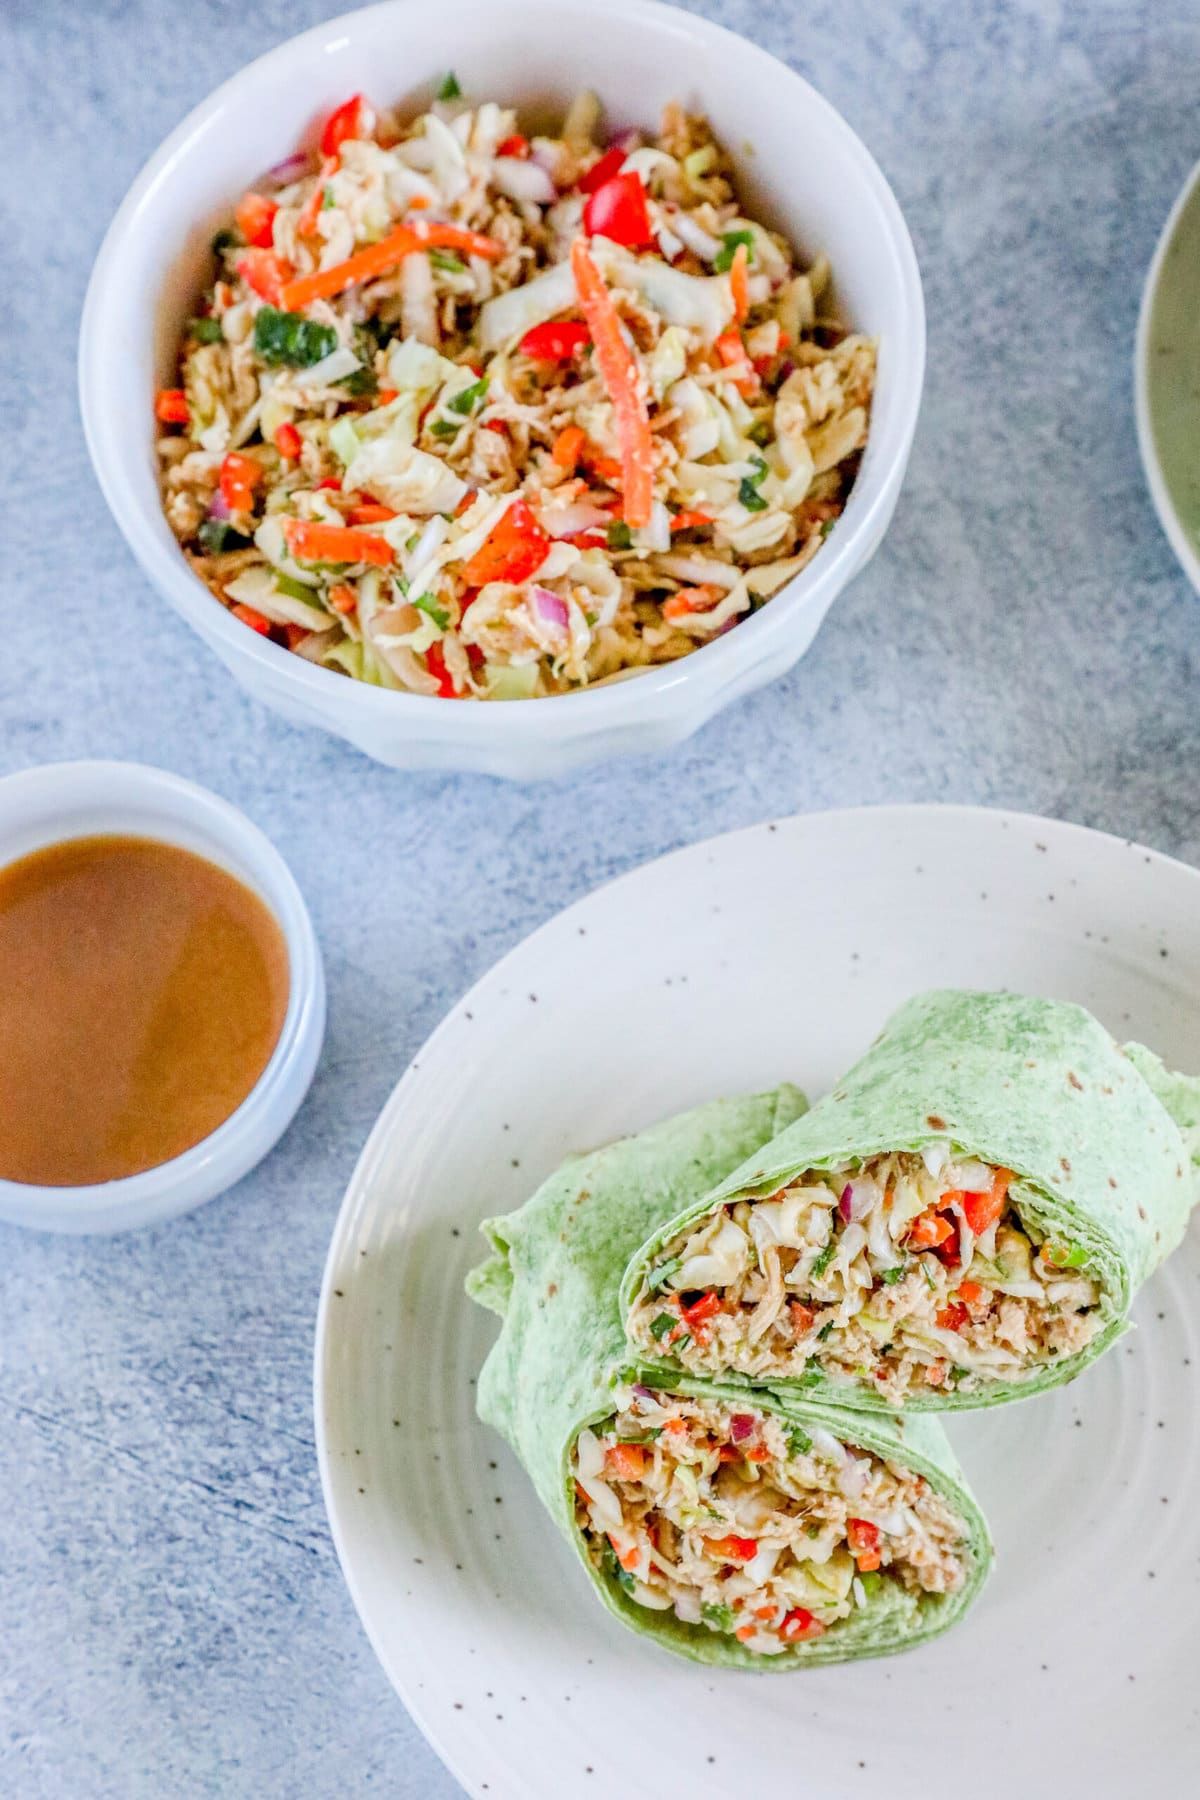 chicken salad with shredded chicken, cabbage, and diced vegetables wrapped in a green tortilla sliced in half on a plate next to a cup of peanut sauce